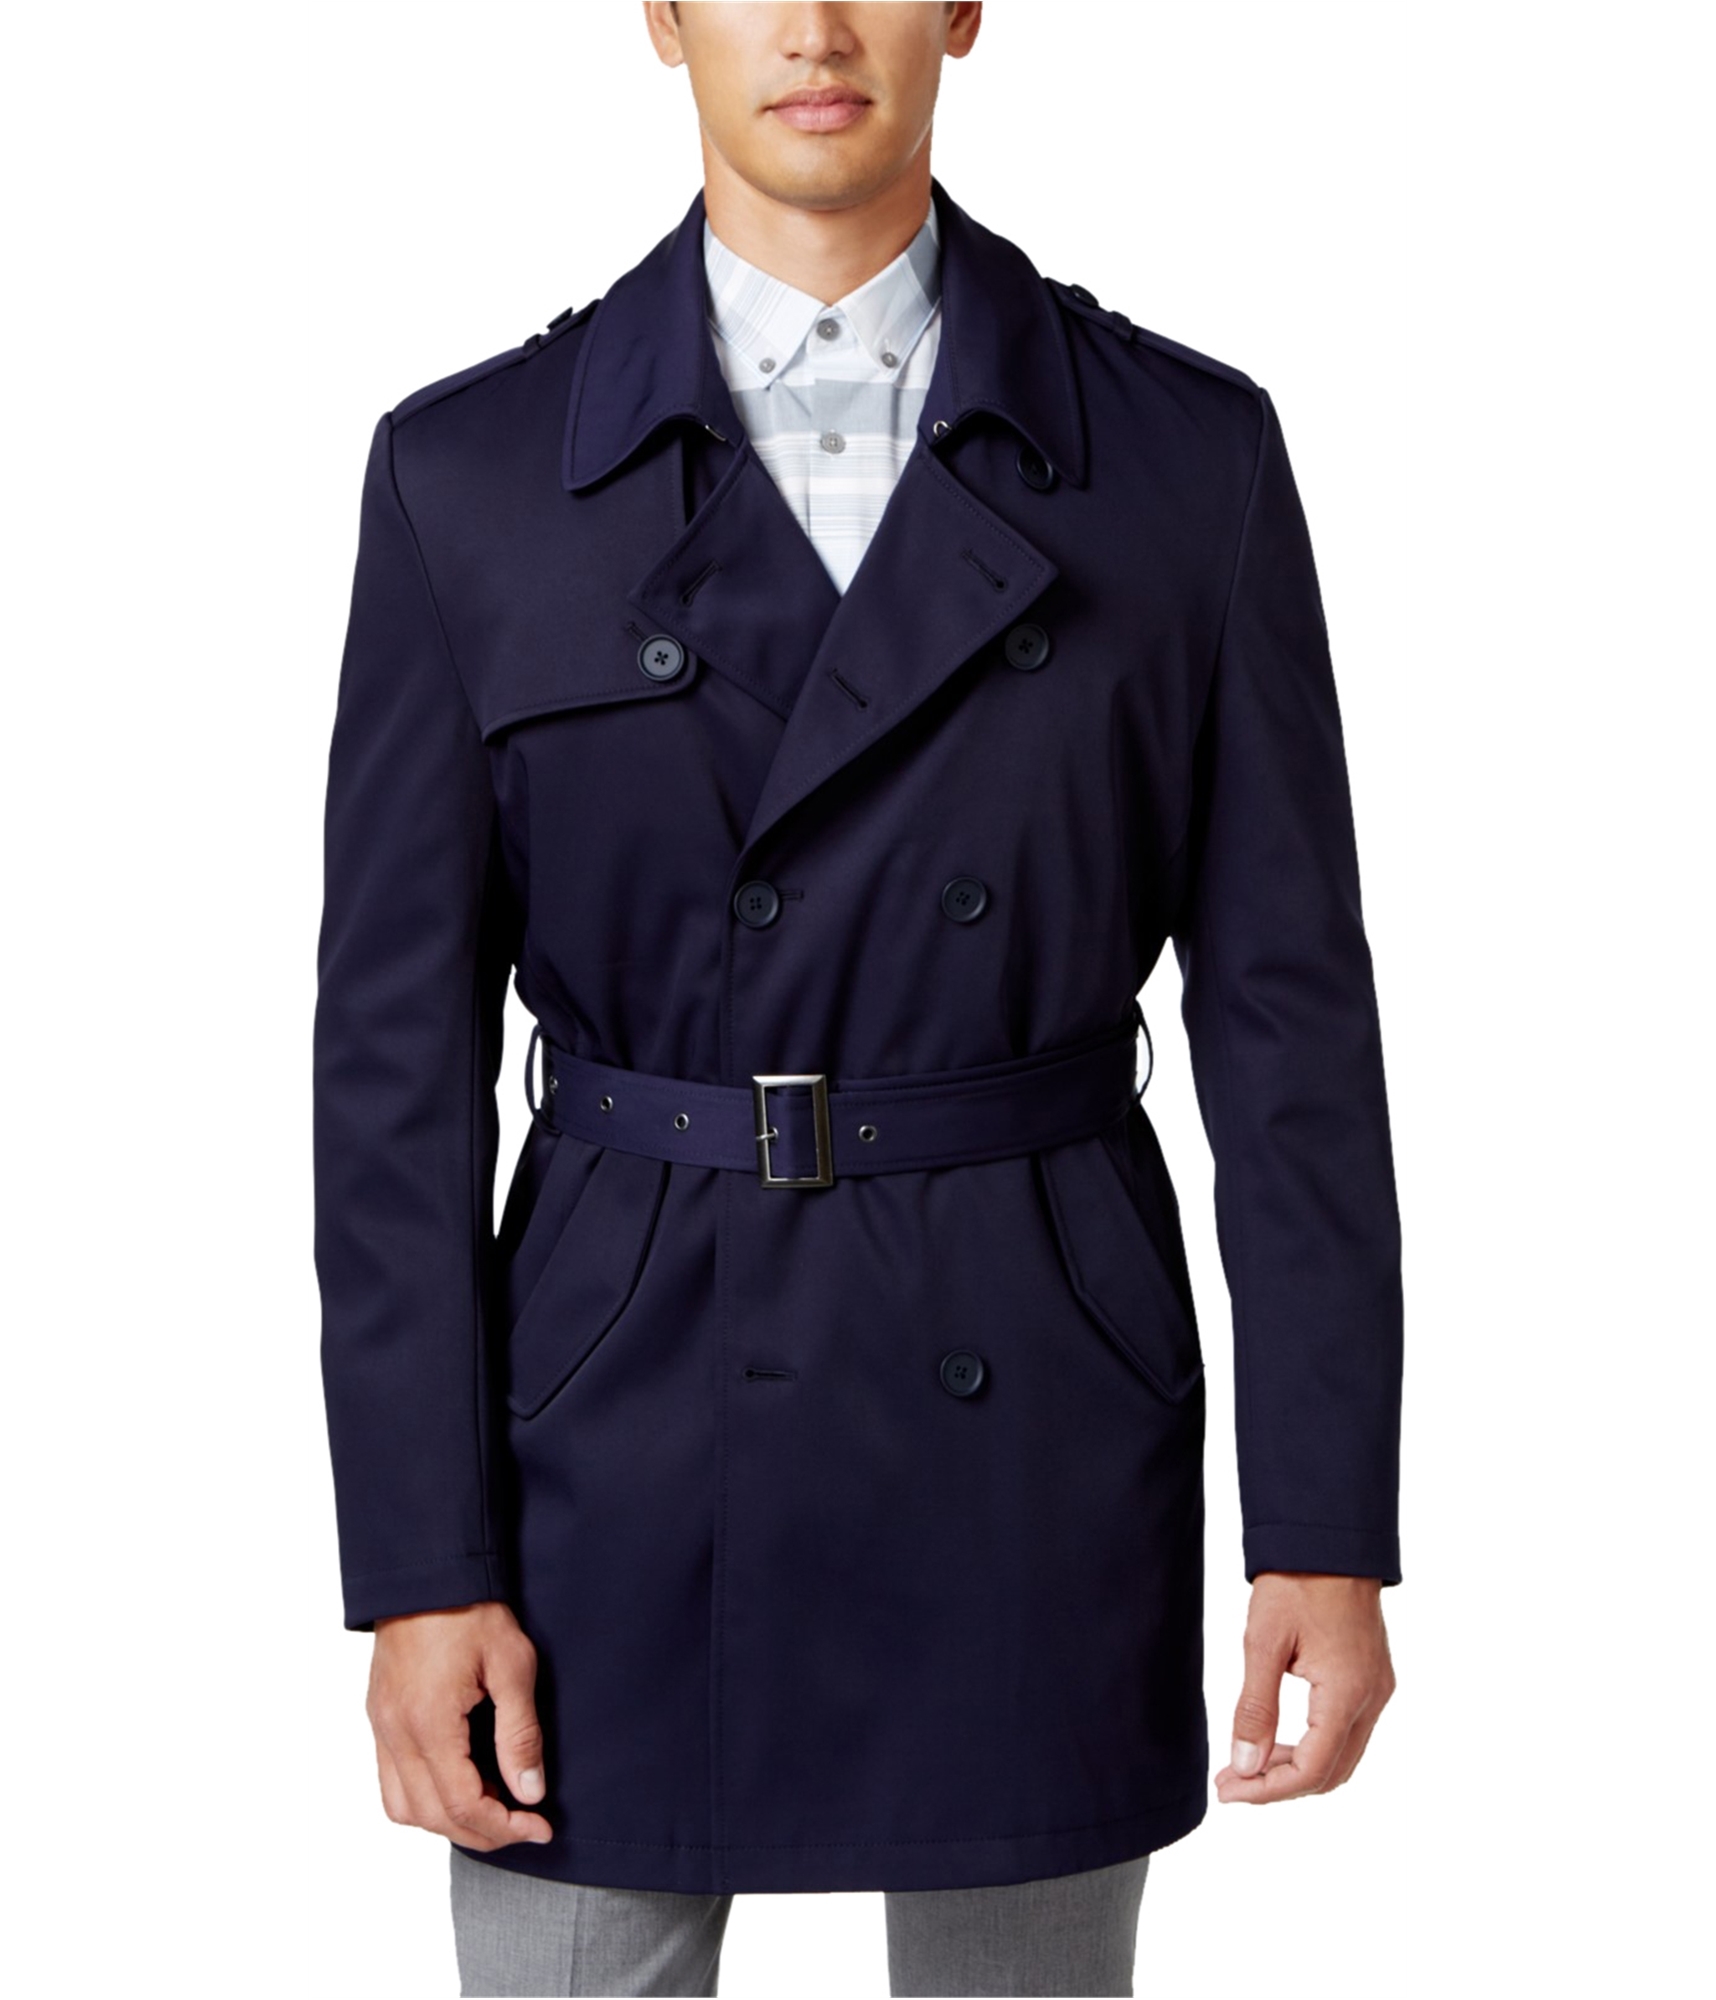 Buy a Mens Calvin Klein Double Breasted Raincoat Online | TagsWeekly.com